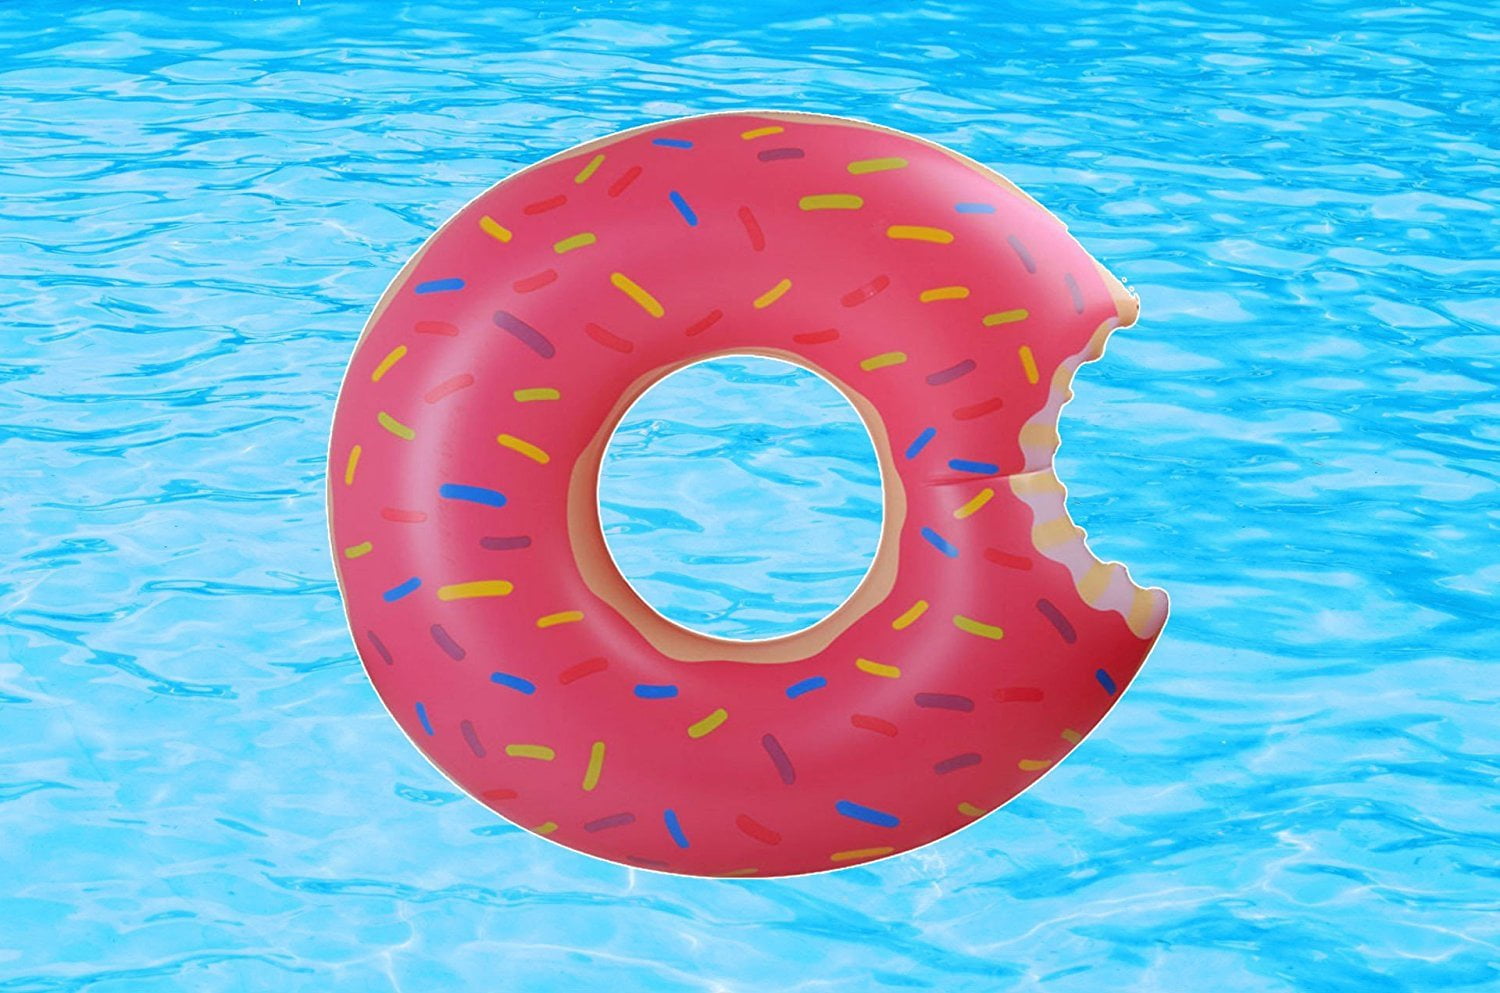 Unisex Swim Ring Inflatable Pool Toys Mermaid Swim Ring Water Inflatable Adult Supplies Oversized Thick Floating Row Floating Bed Swimming Lifebuoy